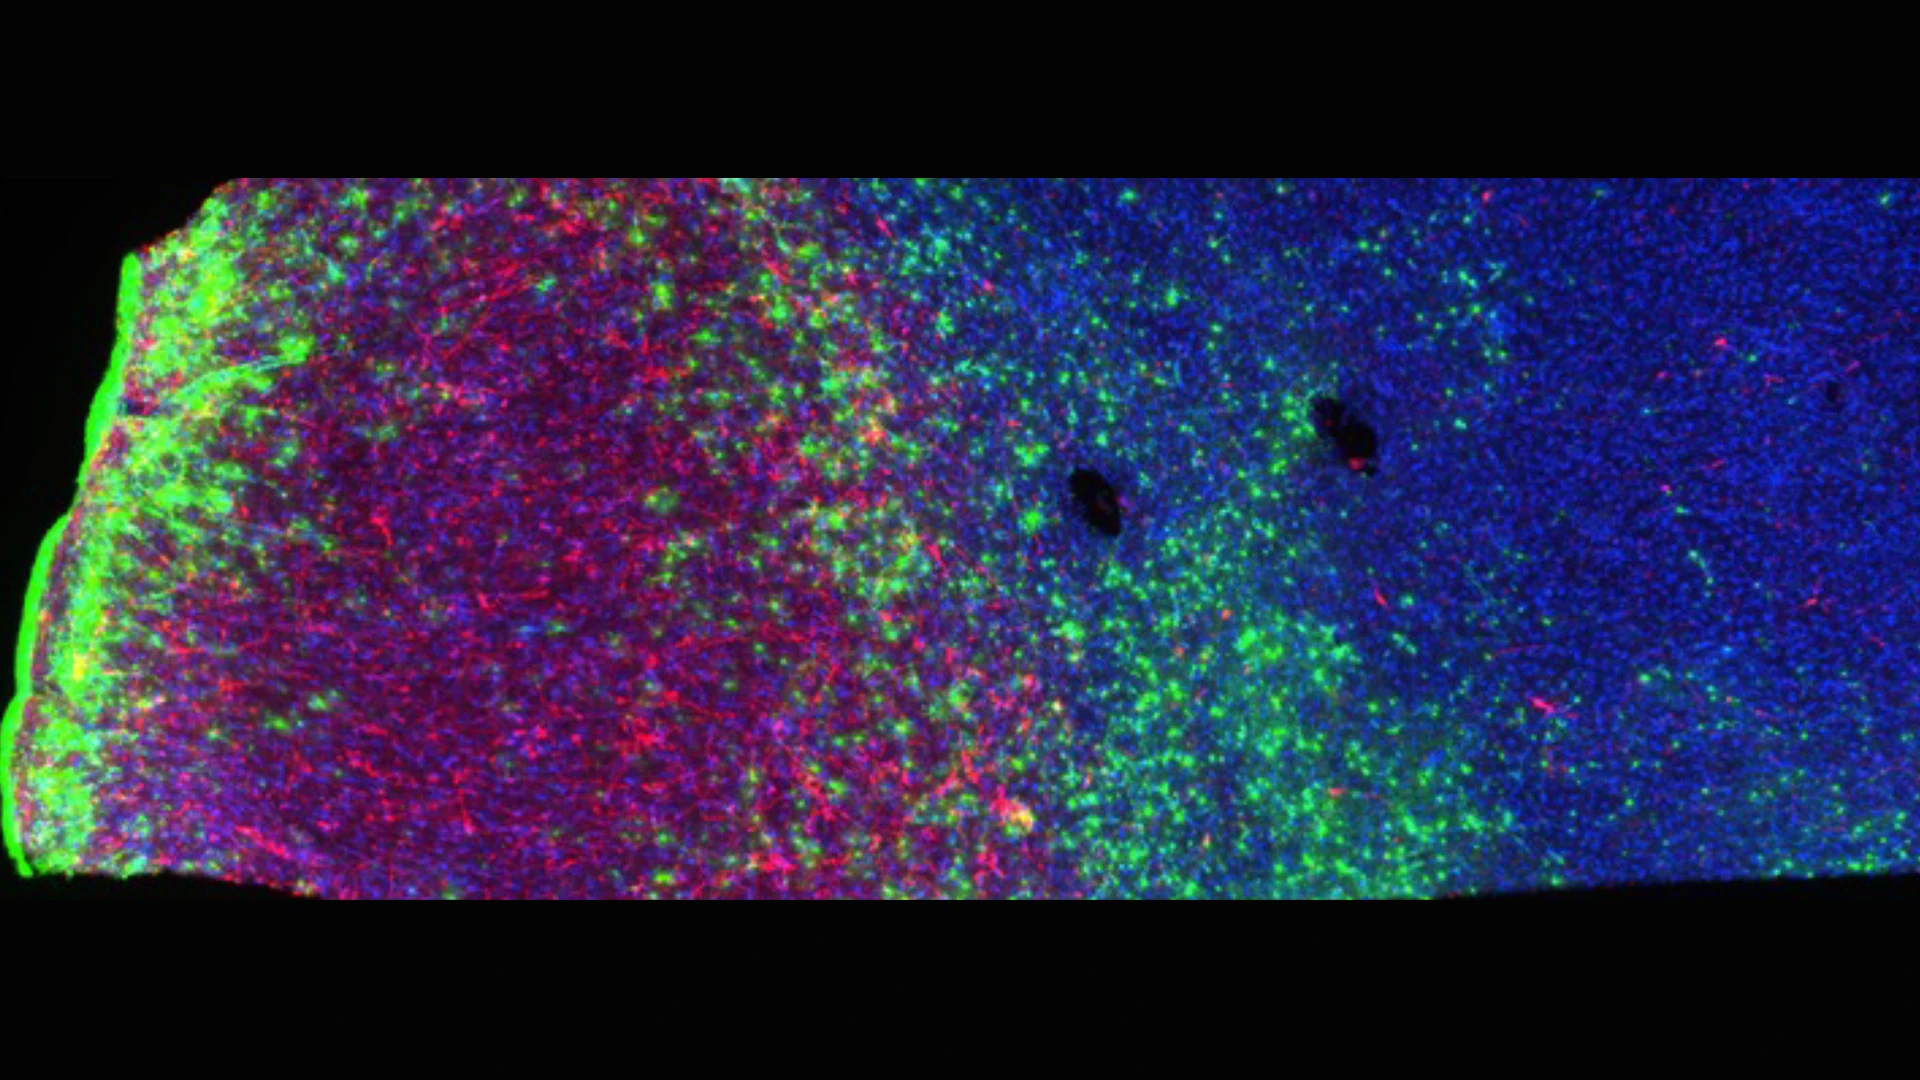 Figure 3. Stained human brain tissue showing neurons (red), astrocytes (green), and microglia (blue). This NIH-funded project is an ambitious attempt, for the first time, to map all the cells in an entire human brain.